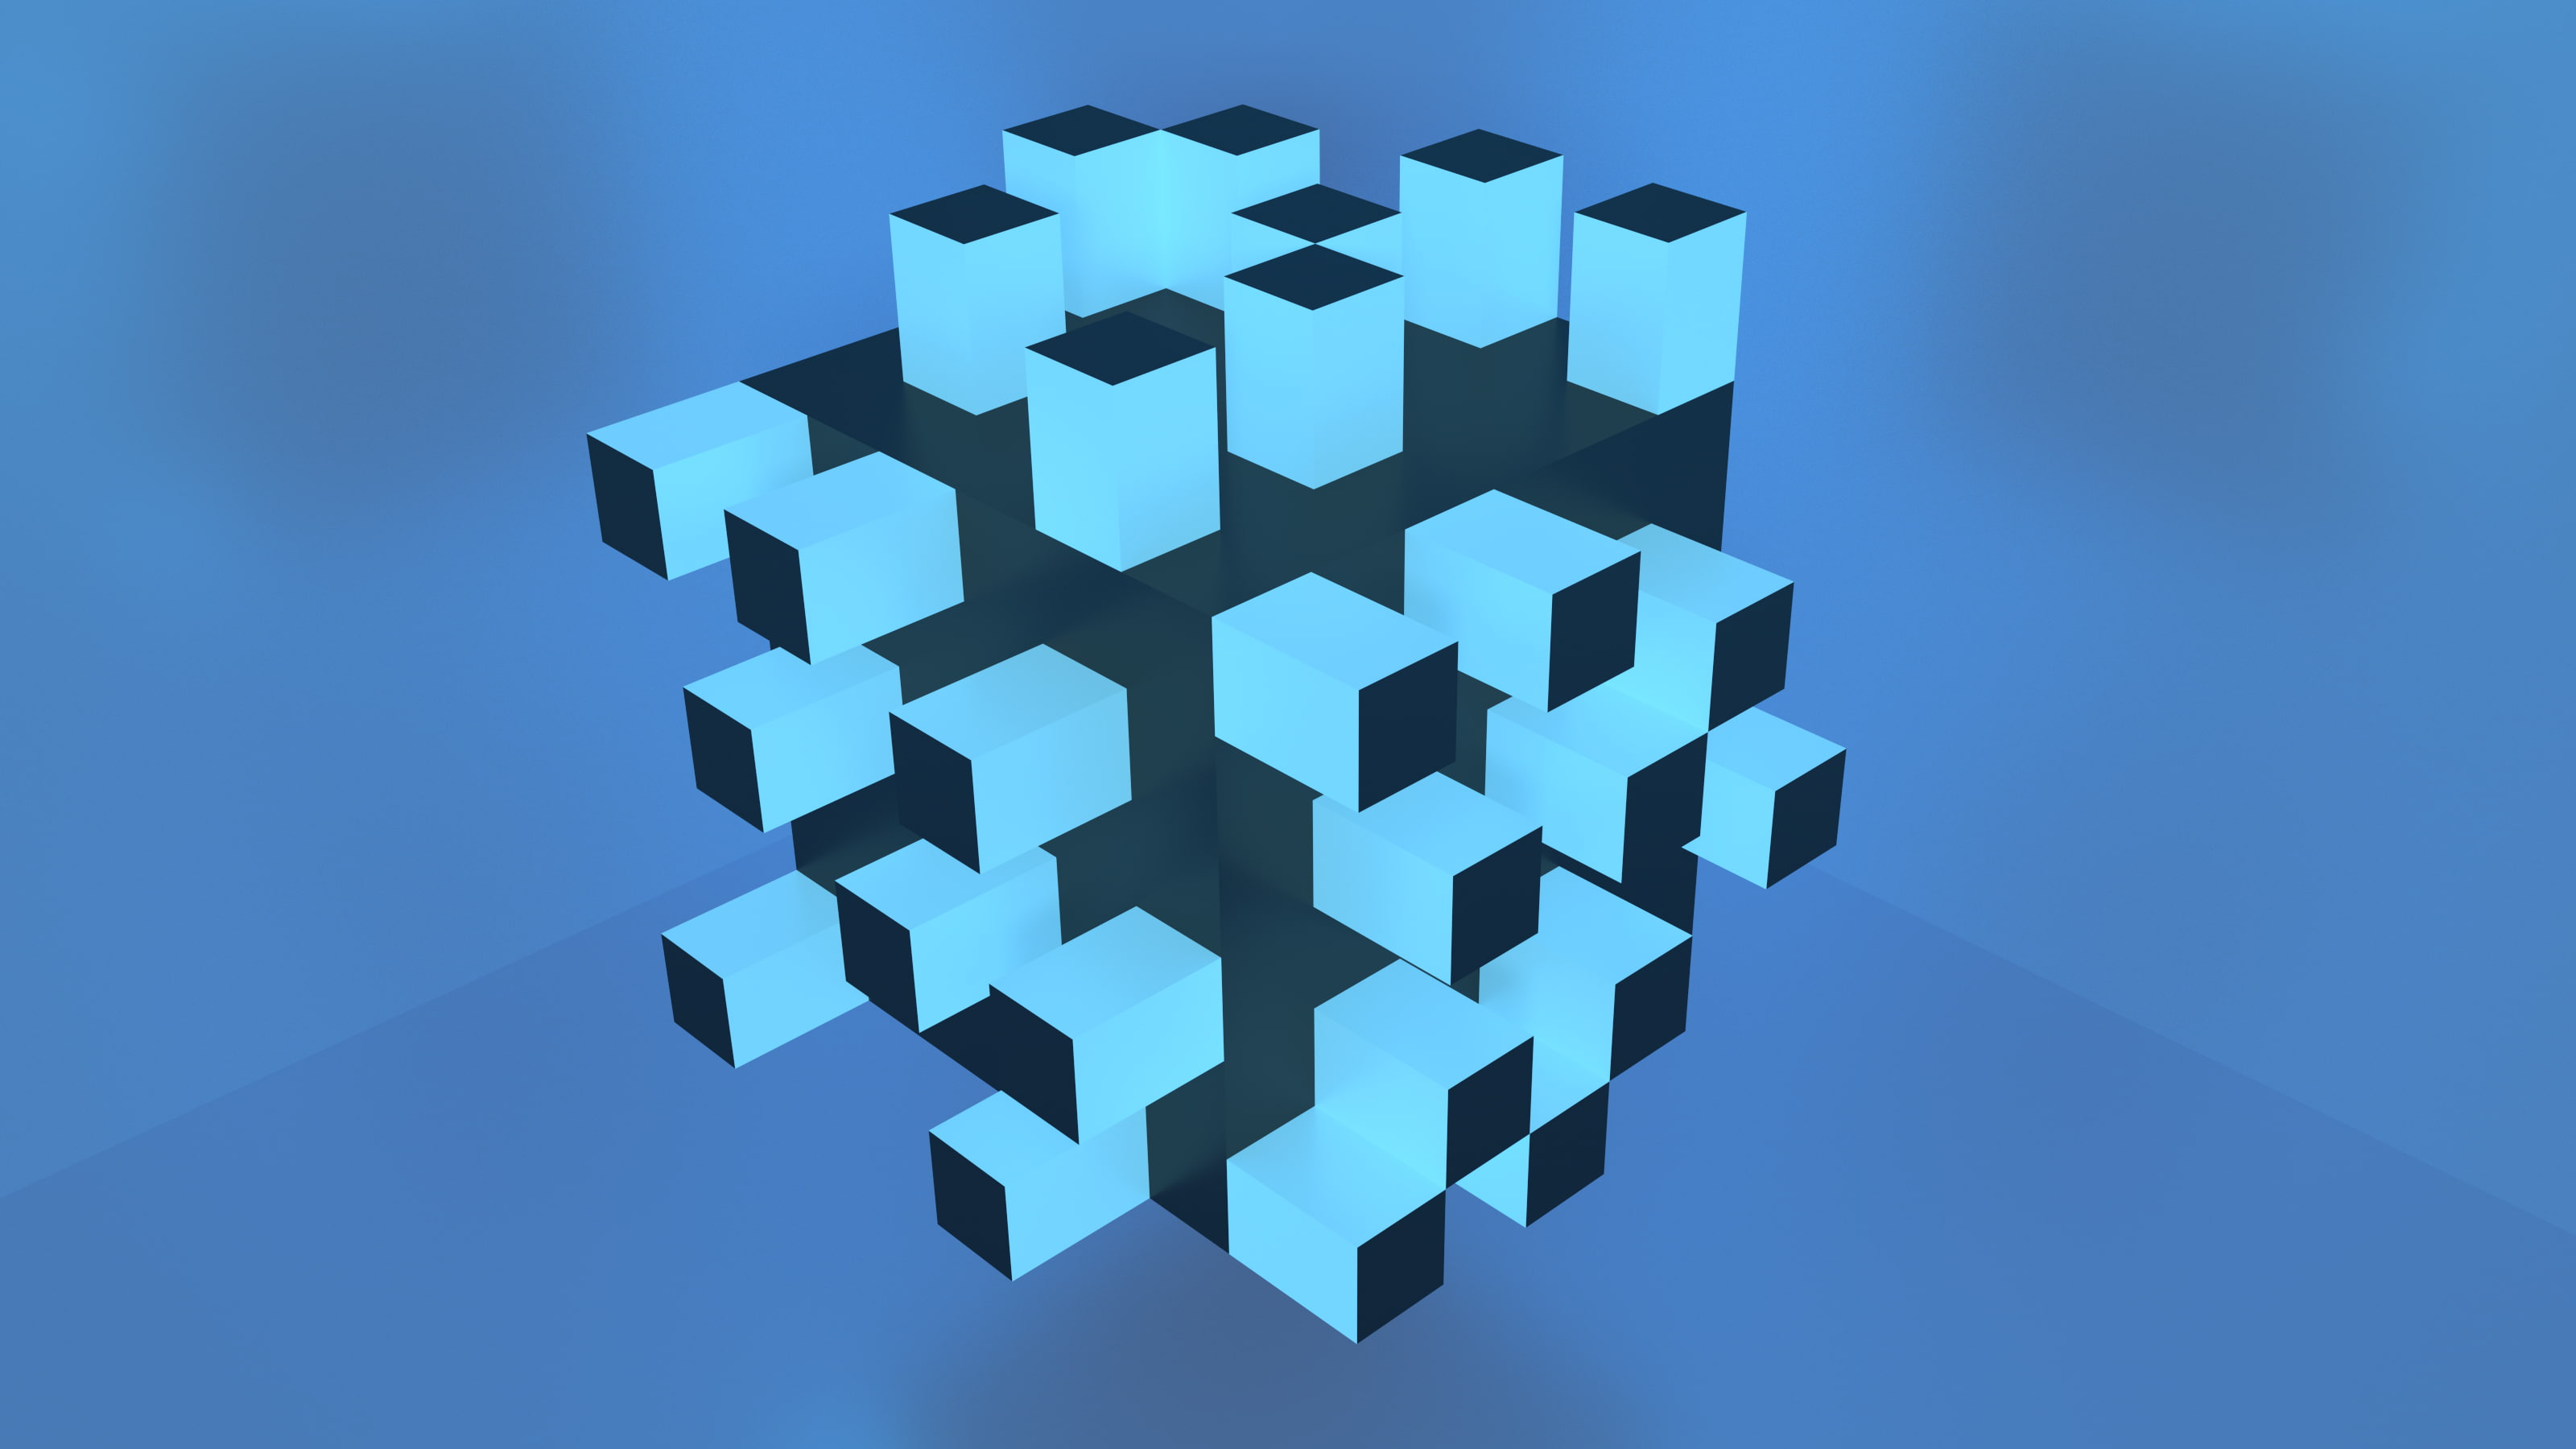 abstract, cube, simple background, blue, no people, blue background